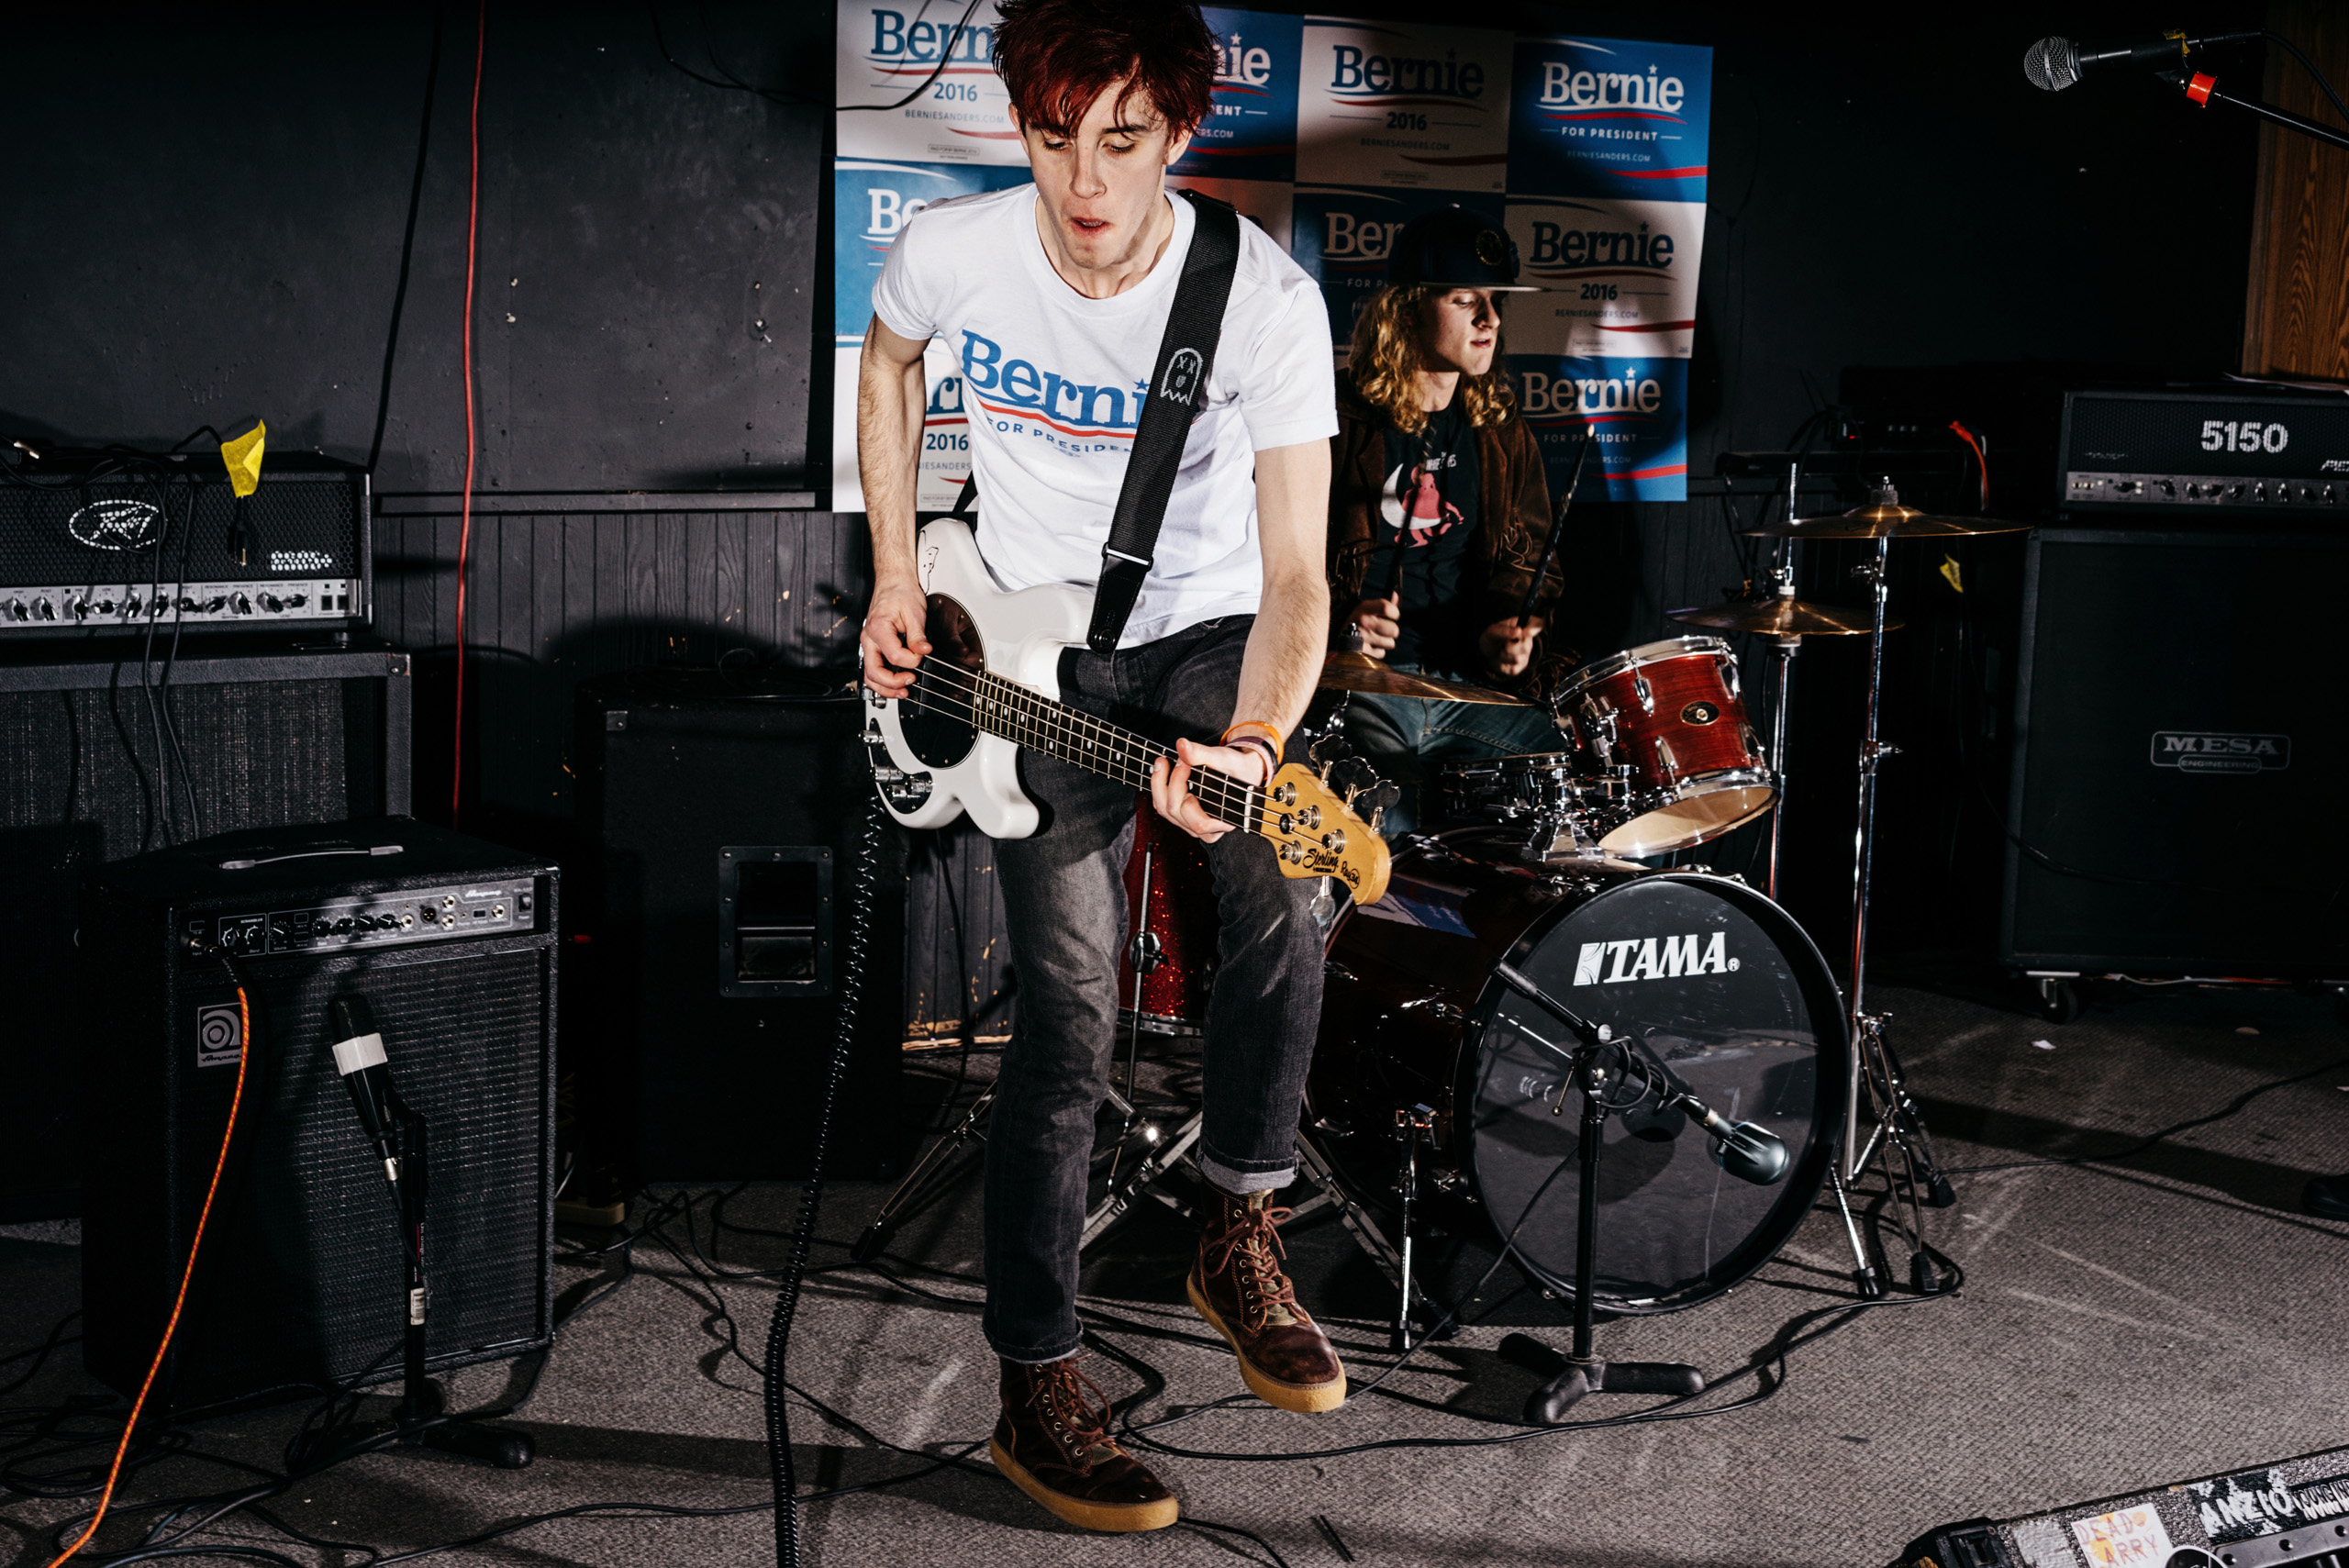 Guitarist Nicholas Fisher
                              of Jimmy and the Stimulators performs at a Bernie Sanders fundraiser billed as  Waterloo Shred for Bernie: Part 2  at The Wedge bar in Waterloo, IA, Saturday January 23, 2016.